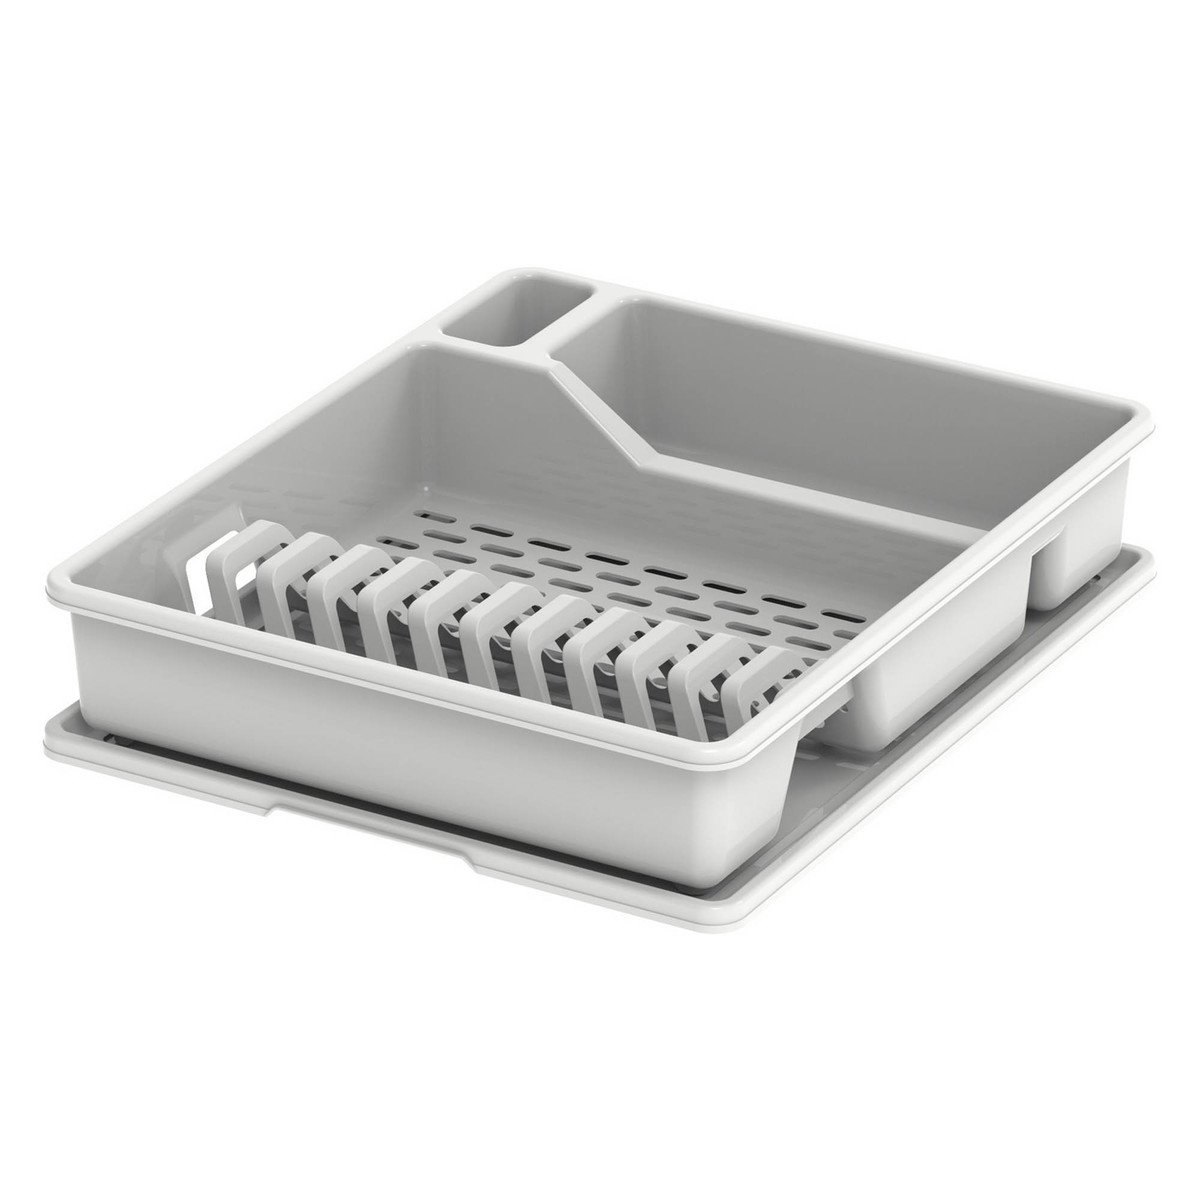 Cosmoplast Dish Drainer Deluxe with Tray Assorted Color